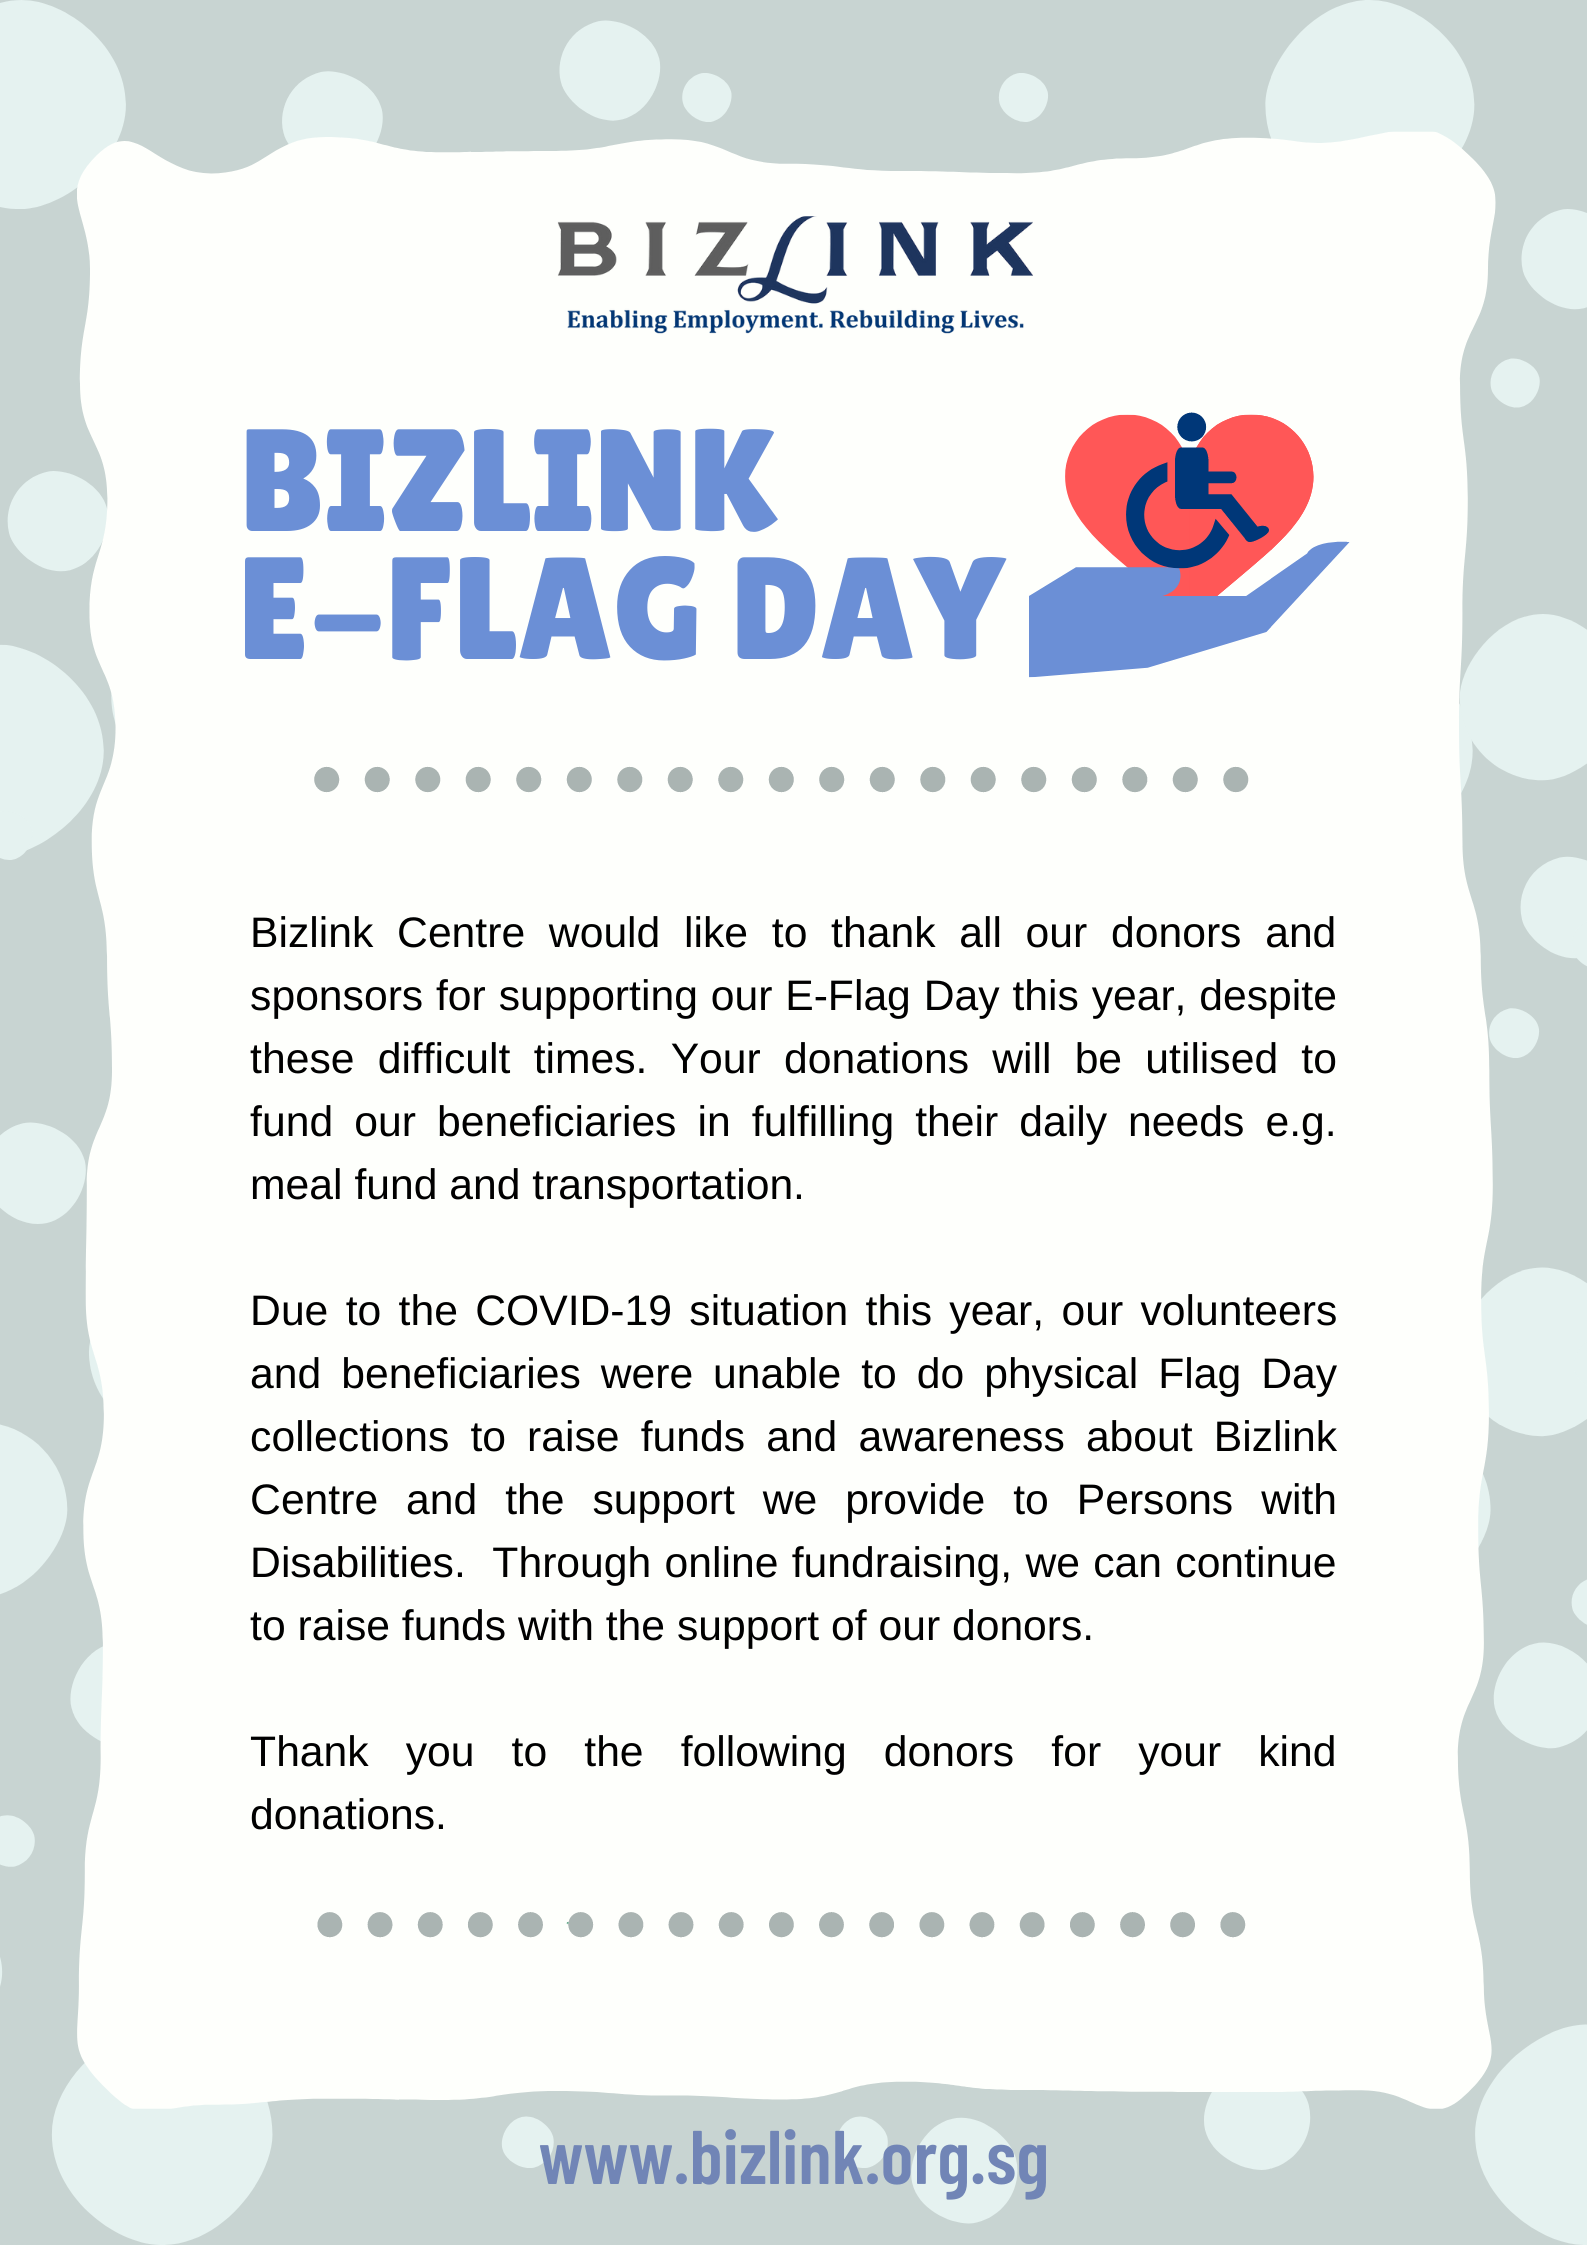 Bizlink E-Flag Day - Bizlink Centre would like to thank all our donors and sponsors for supporting our E-Flag Day this year, despite these difficult times. Your donations will be utilised to fund our beneficiaries in fulfilling their daily needs e.g. meal fund and transportation. Due to the COVID-19 situation this year, our volunteers and beneficiaries were unable to do physical Flag Day collections to raise funds and awareness about Bizlink Centre and the support we provide to Persons with Disabilities.  Through online fundraising, we can continue to raise funds with the support of our donors.   Thank you to the following donors for their kind donation. 